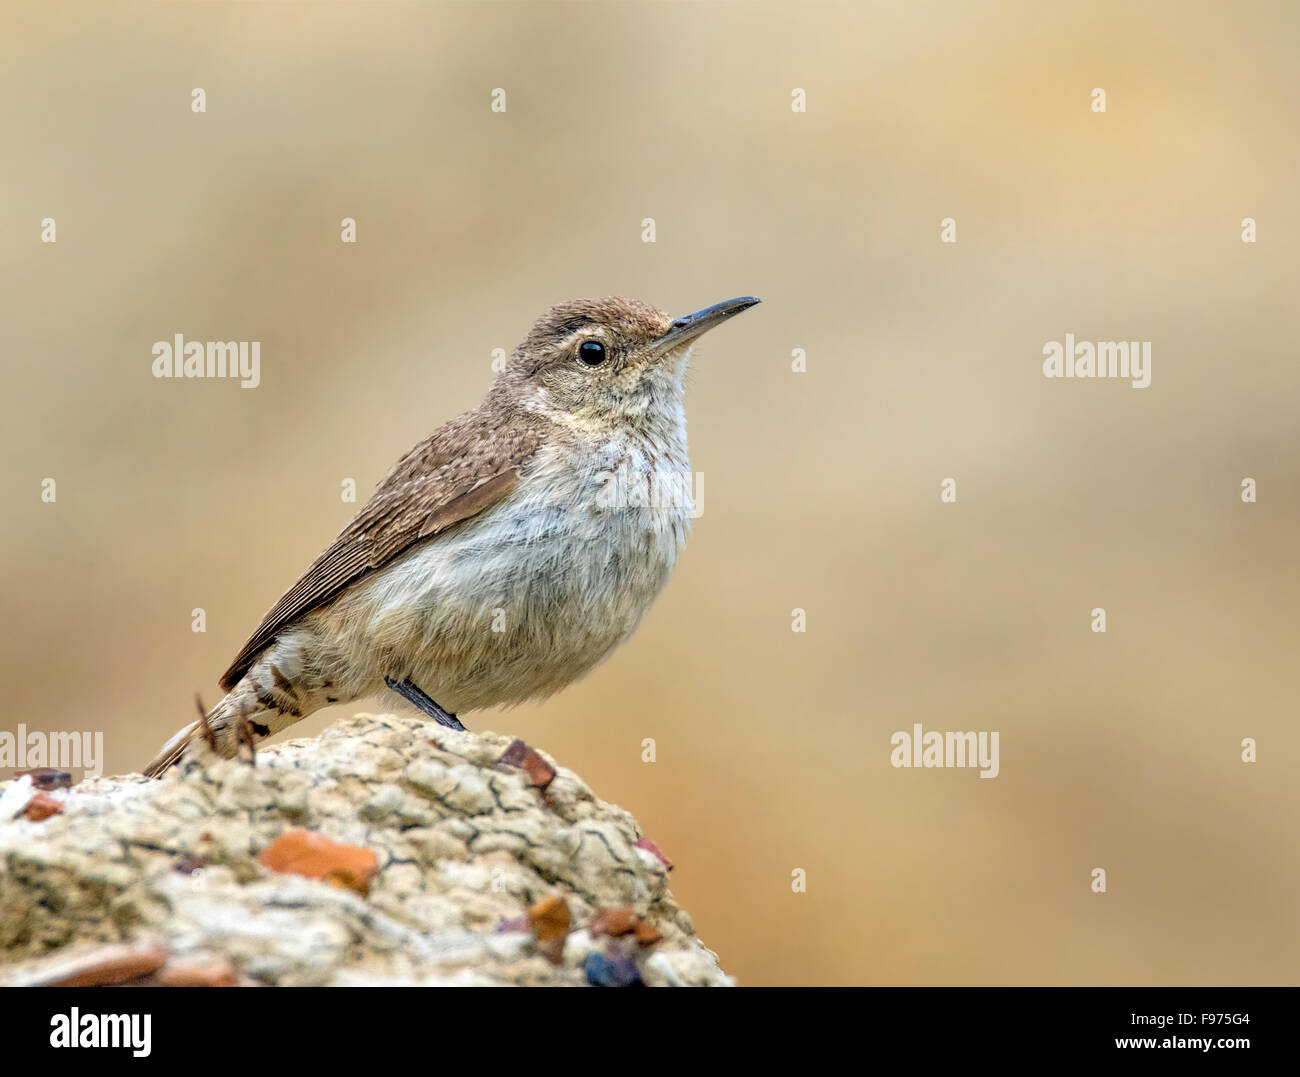 A Rock Wren (Salpinctes obsoletus) perched on a rock in the badlands of North Dakota Stock Photo